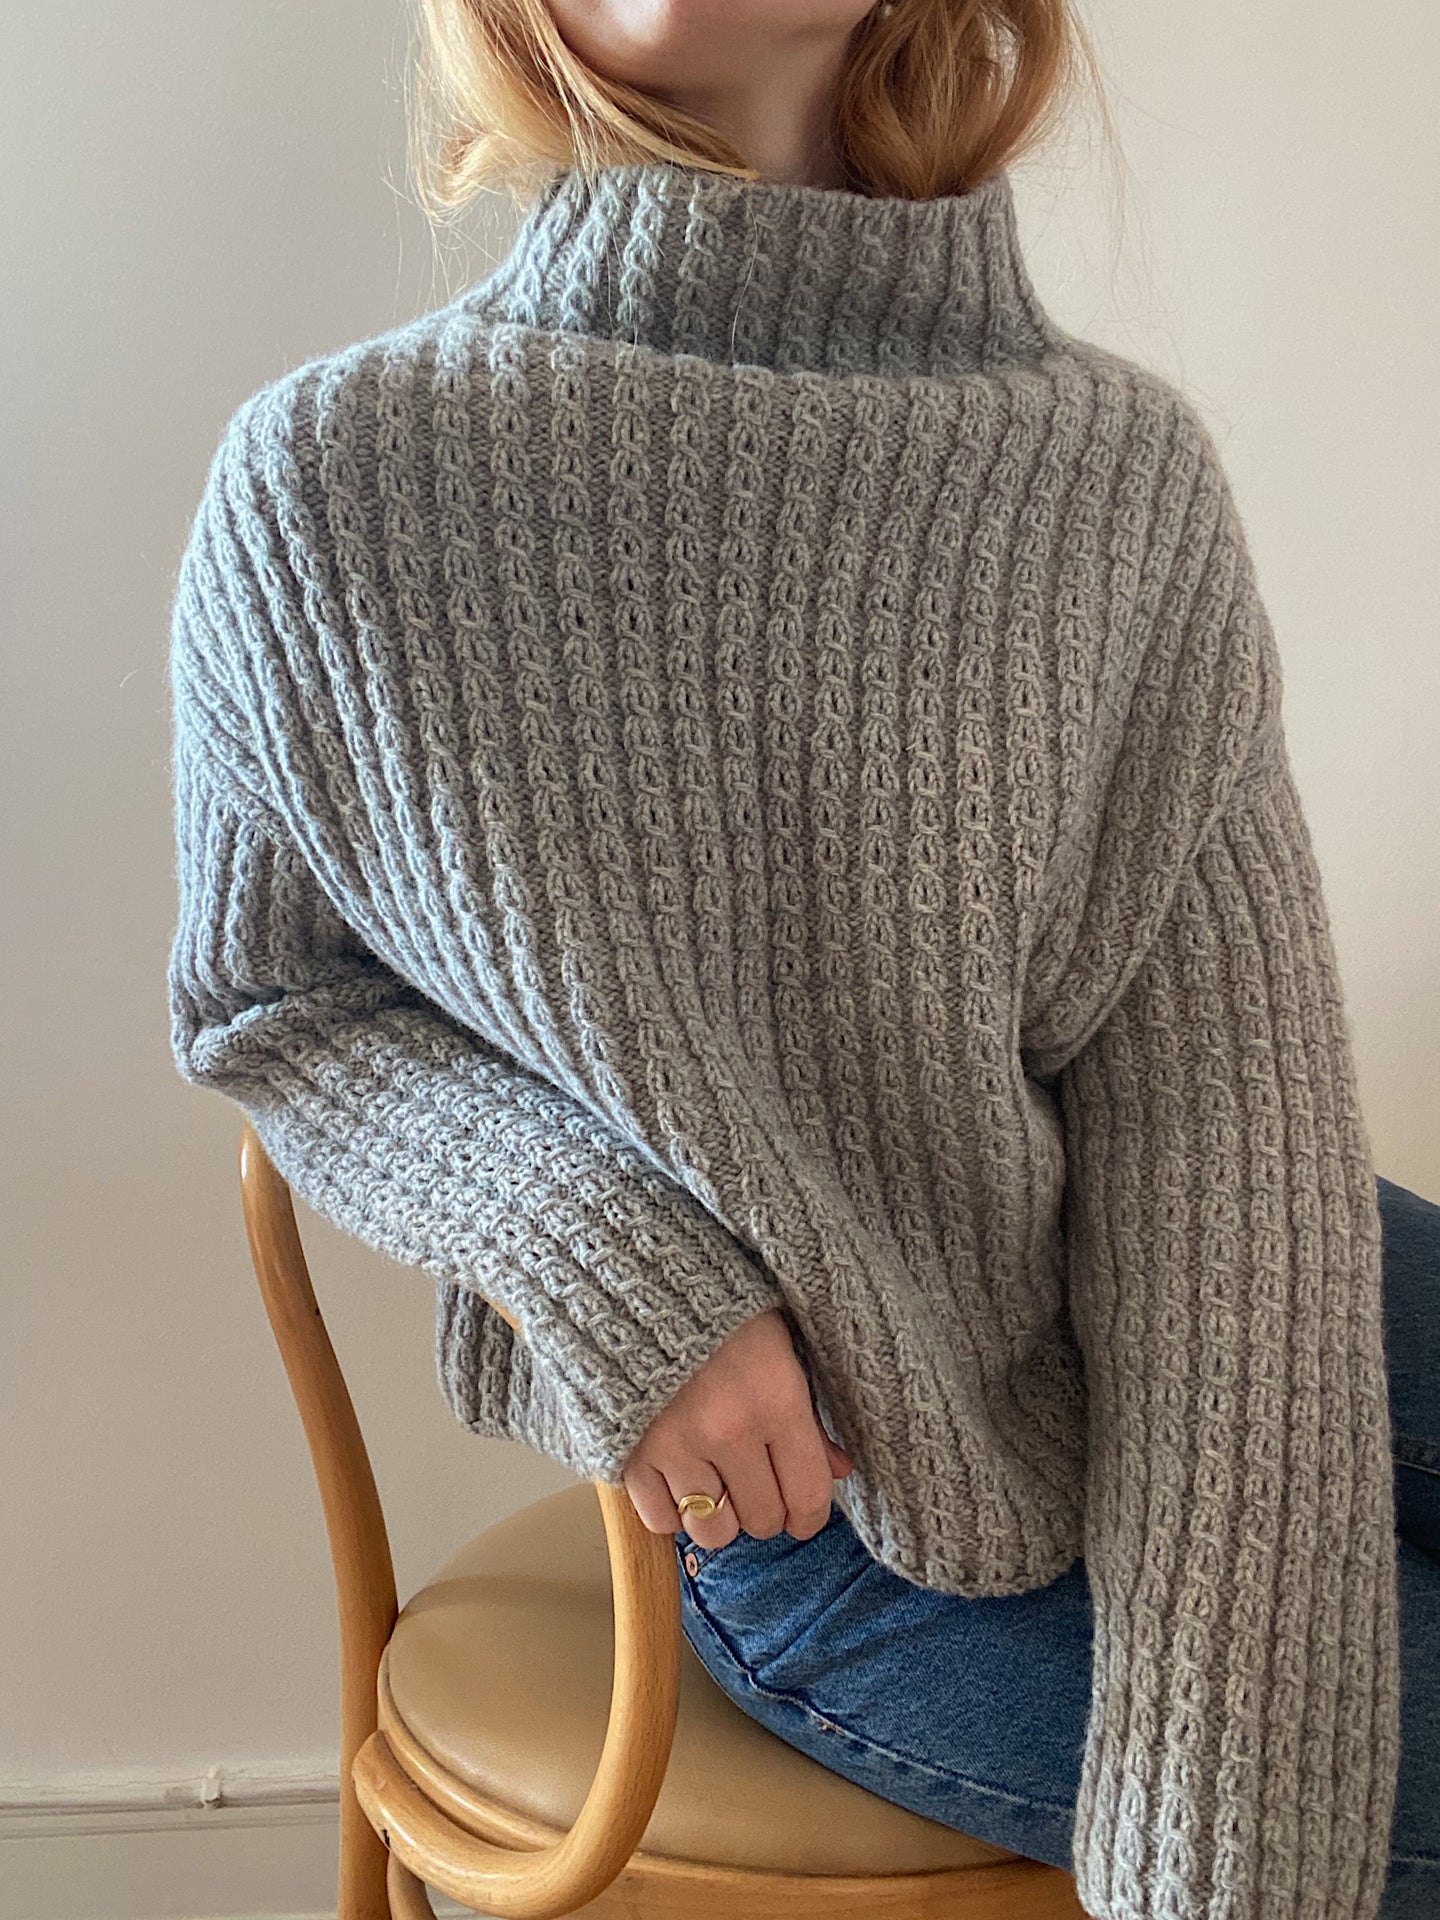 Sweater No. 19 - NORSK